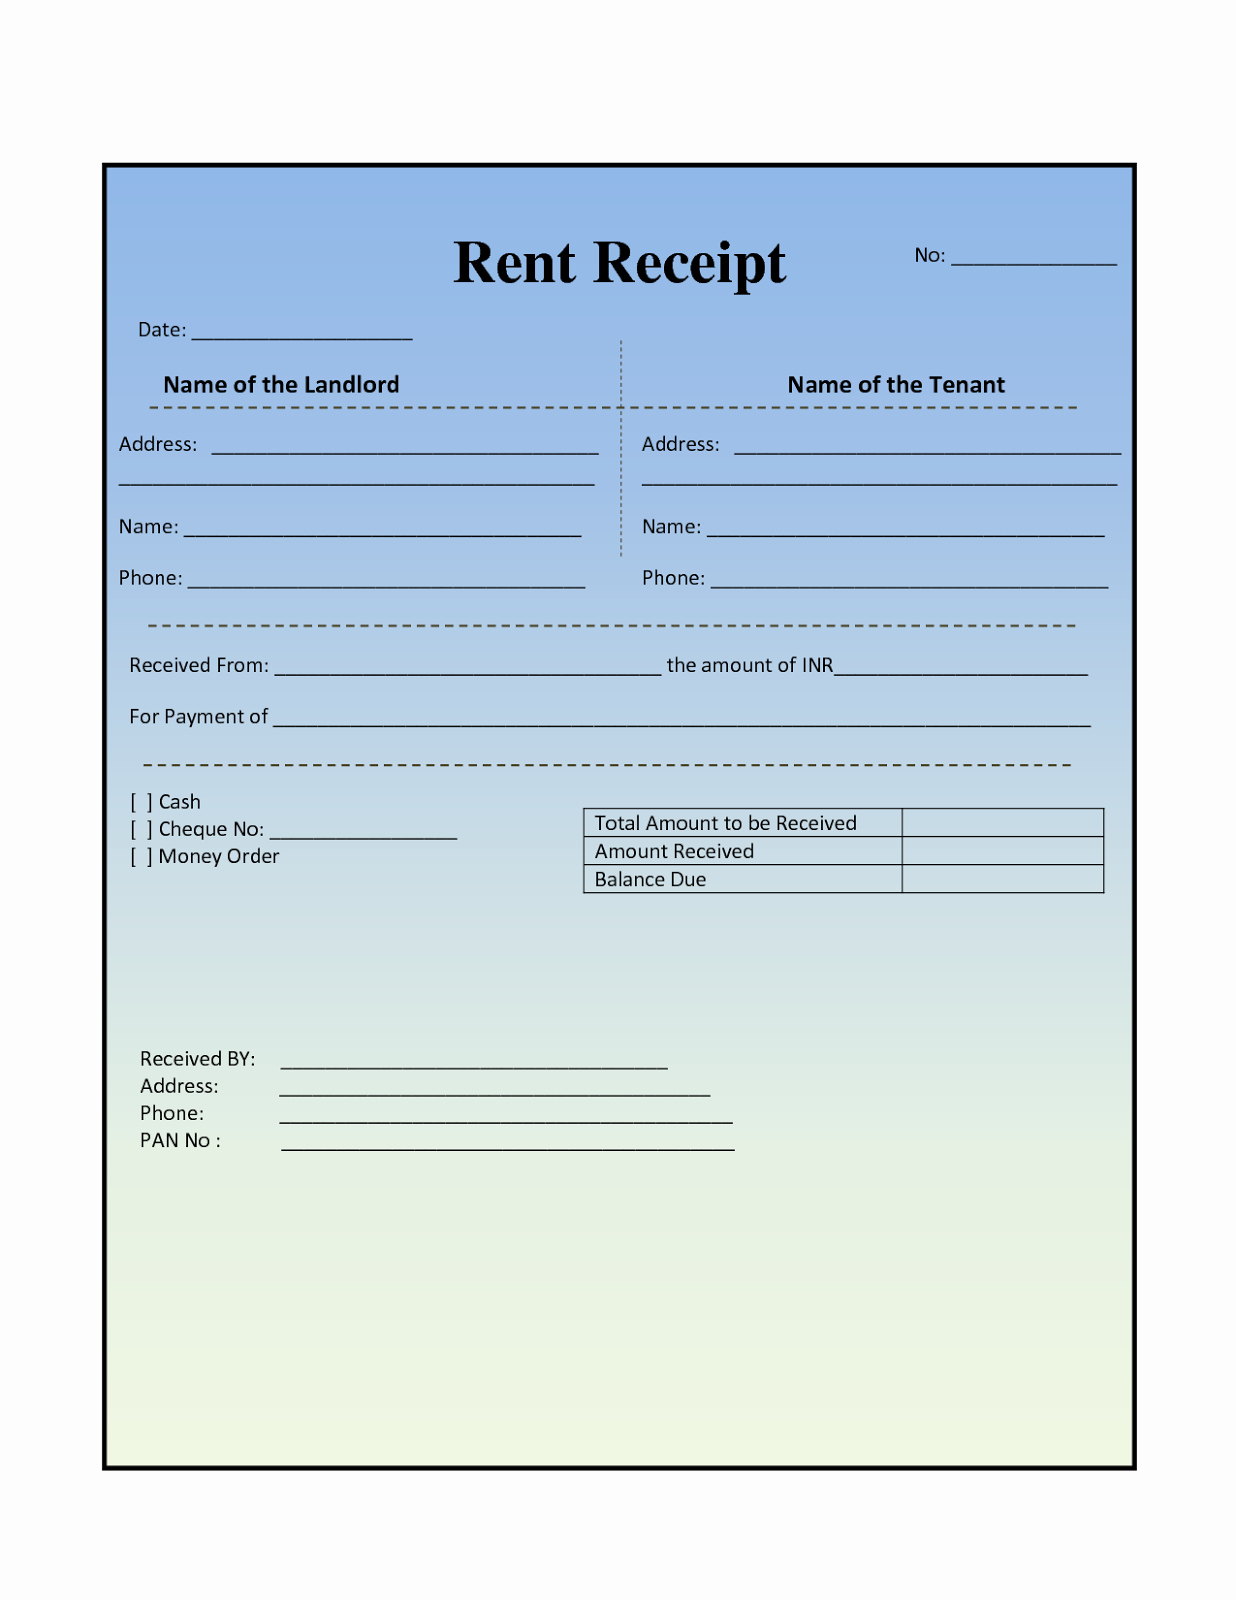 Rent Receipt Template Word Inspirational Easy to Use House or Property Rent Receipt Samples to